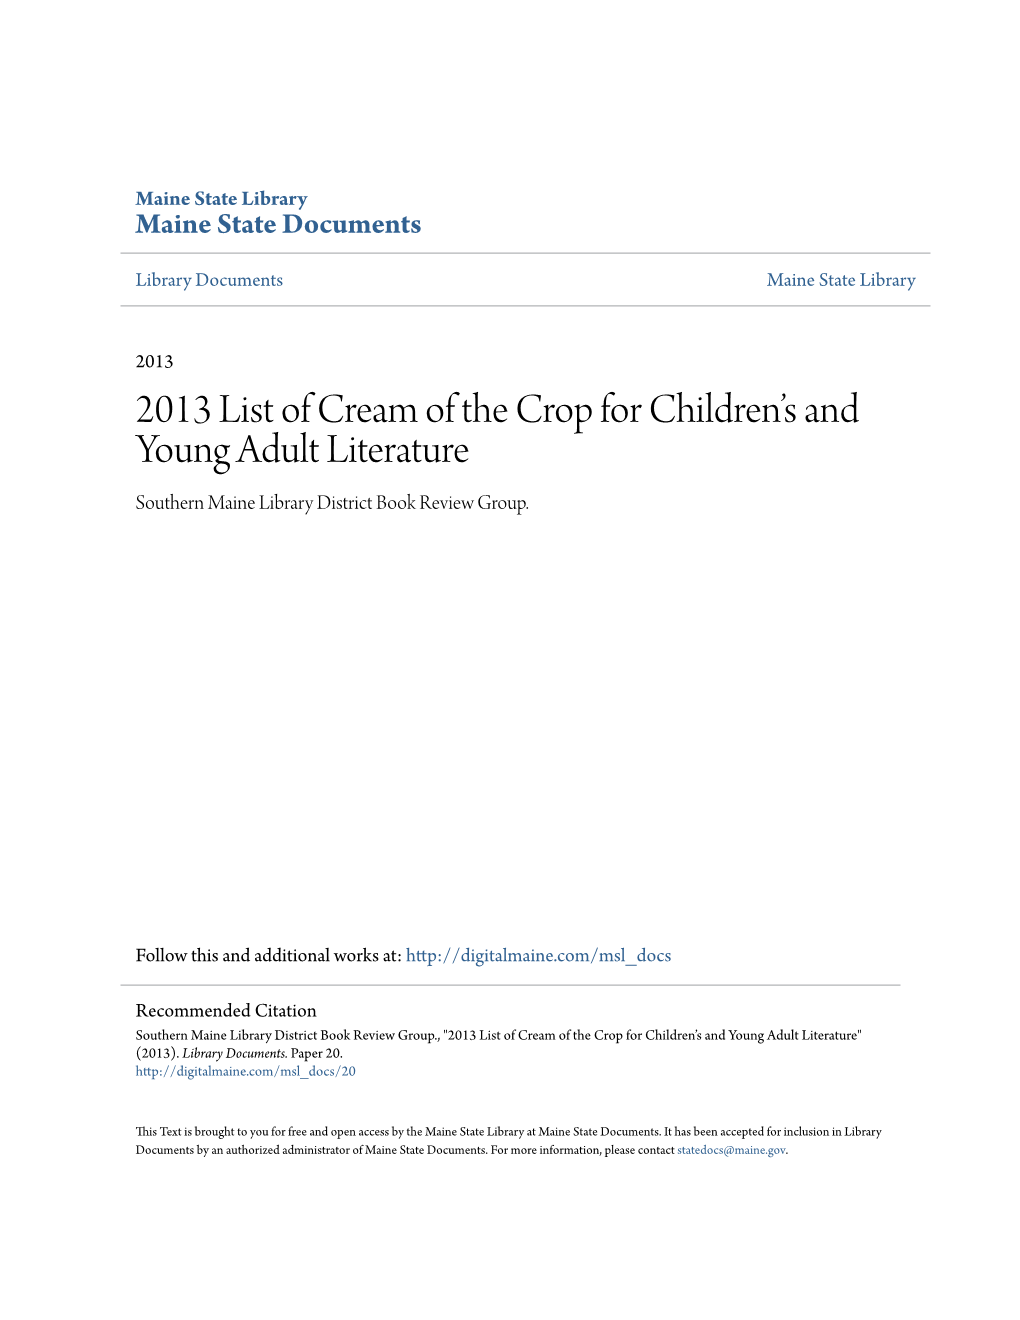 2013 List of Cream of the Crop for Children's and Young Adult Literature